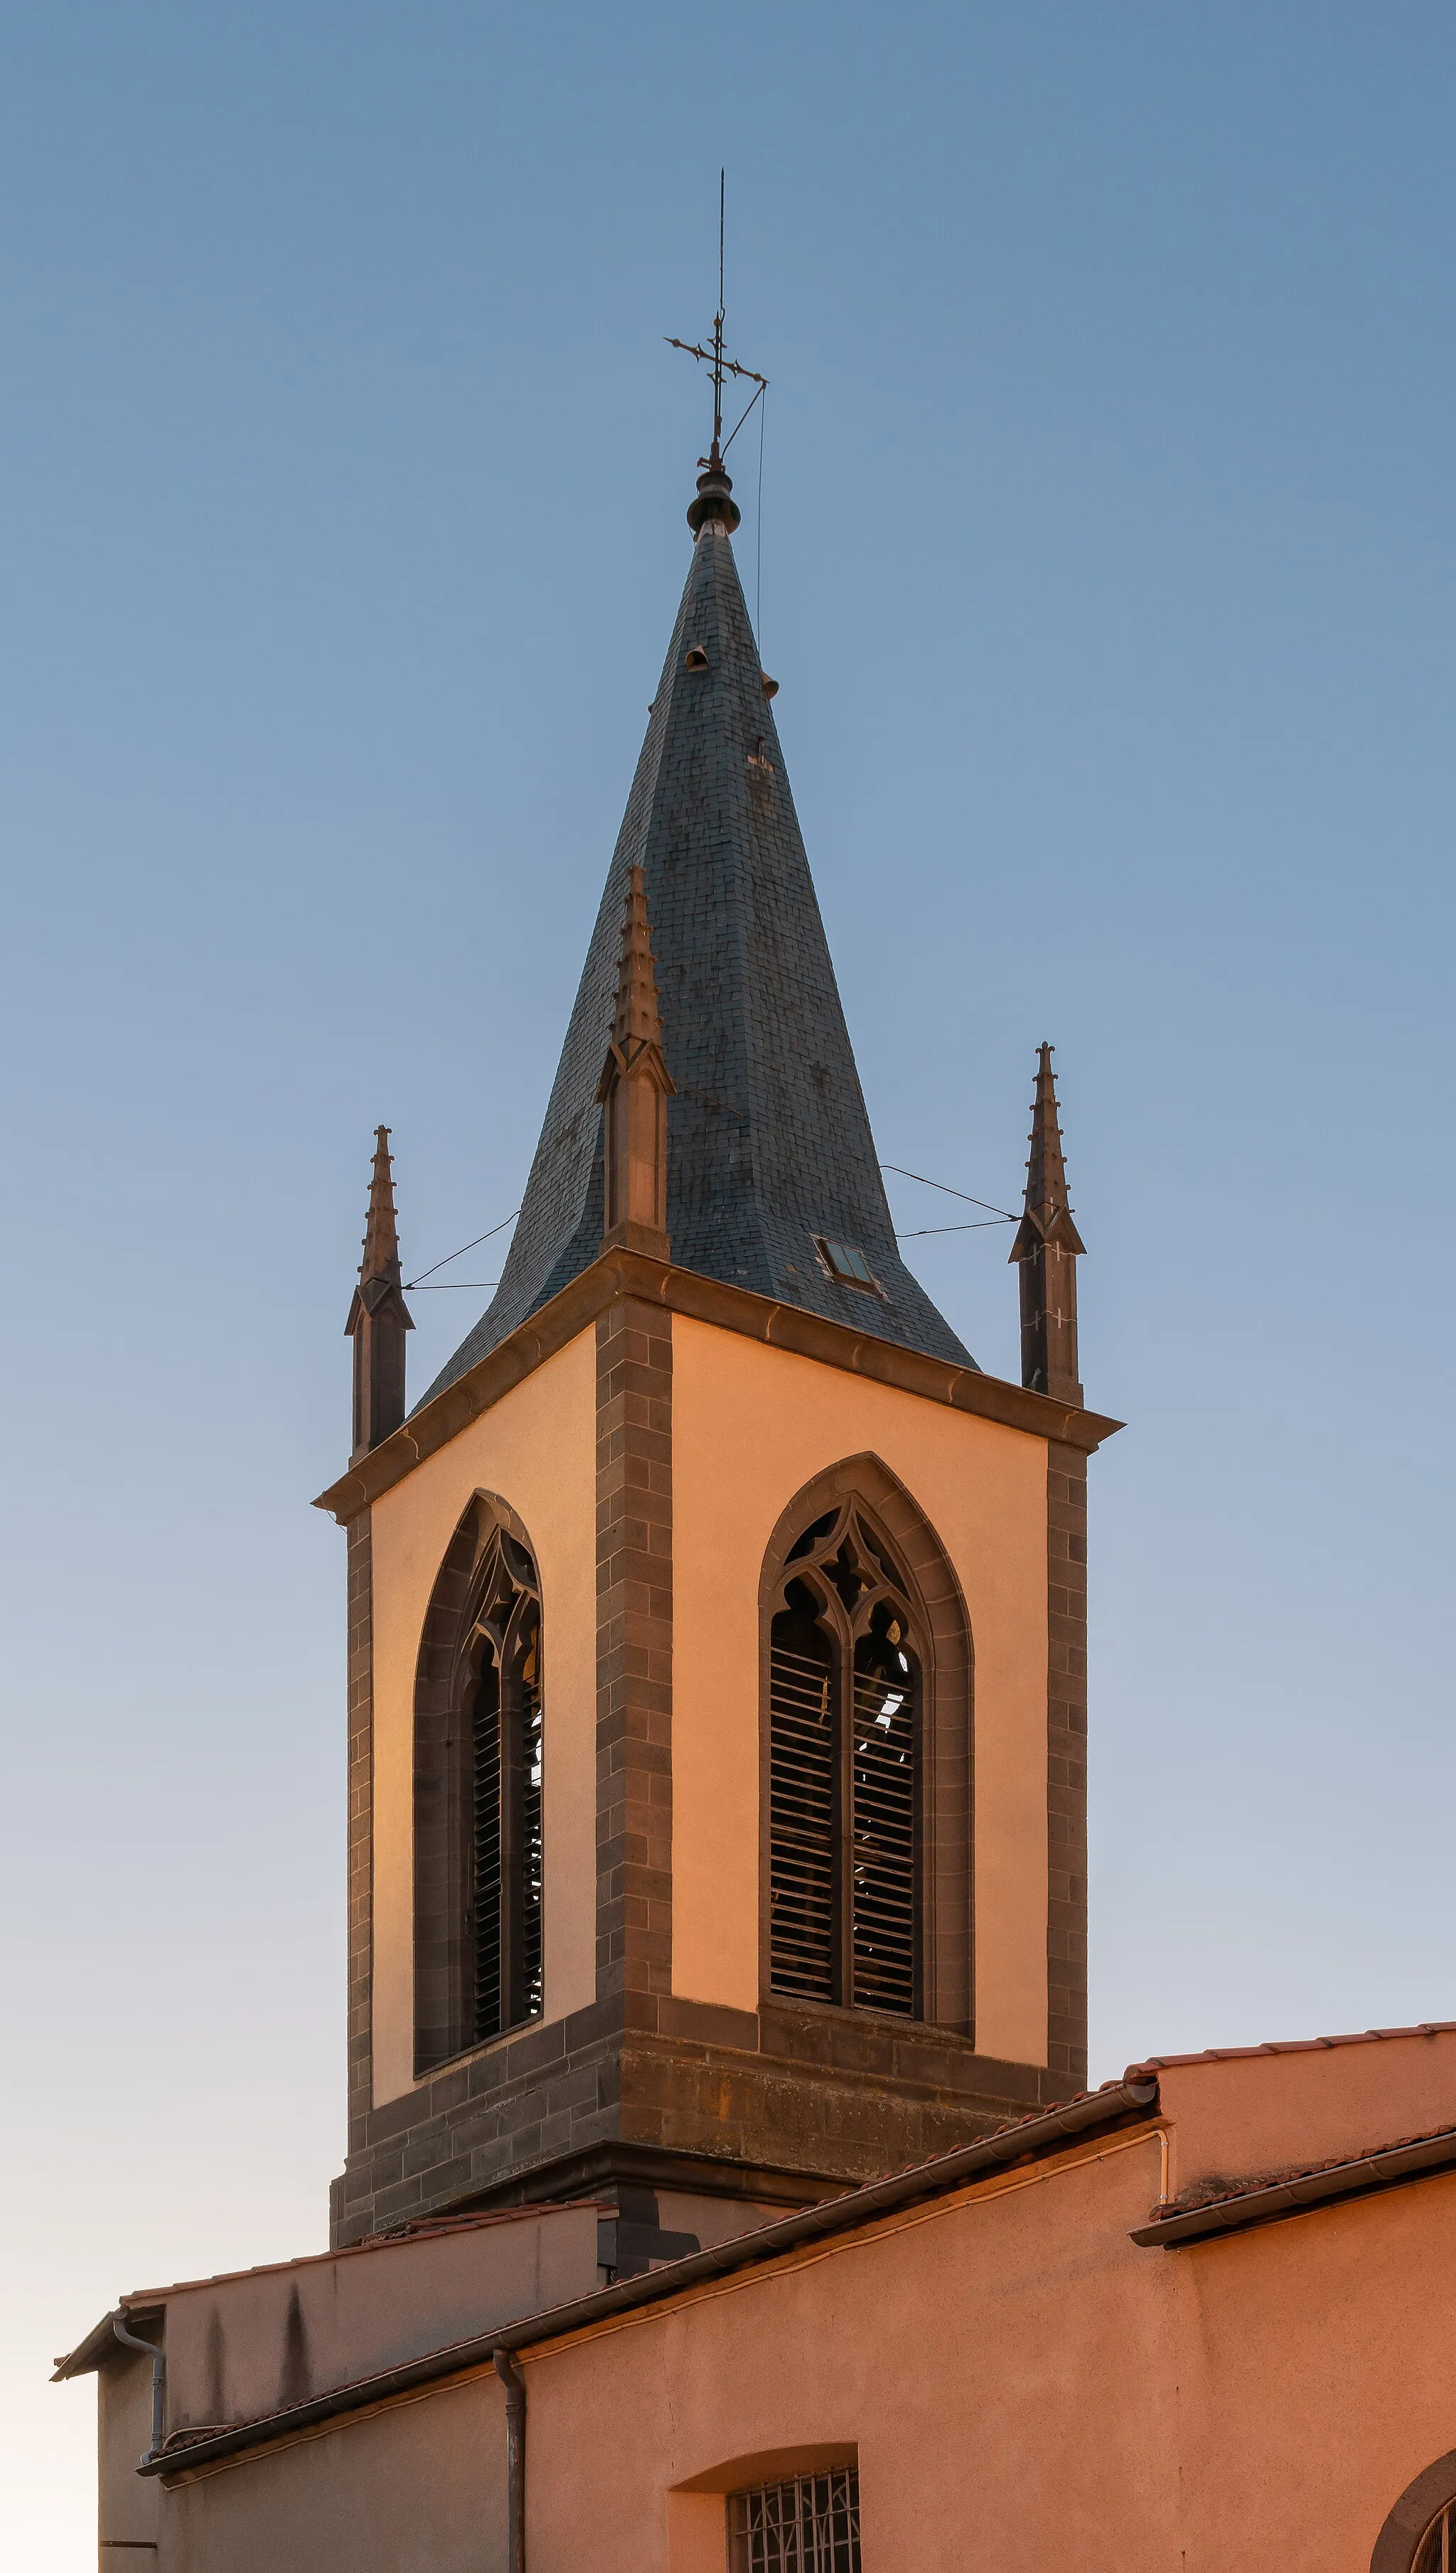 Photo showing: Bell tower of the Saint Peter in chains church in Mezel, Puy-de-Dôme, France